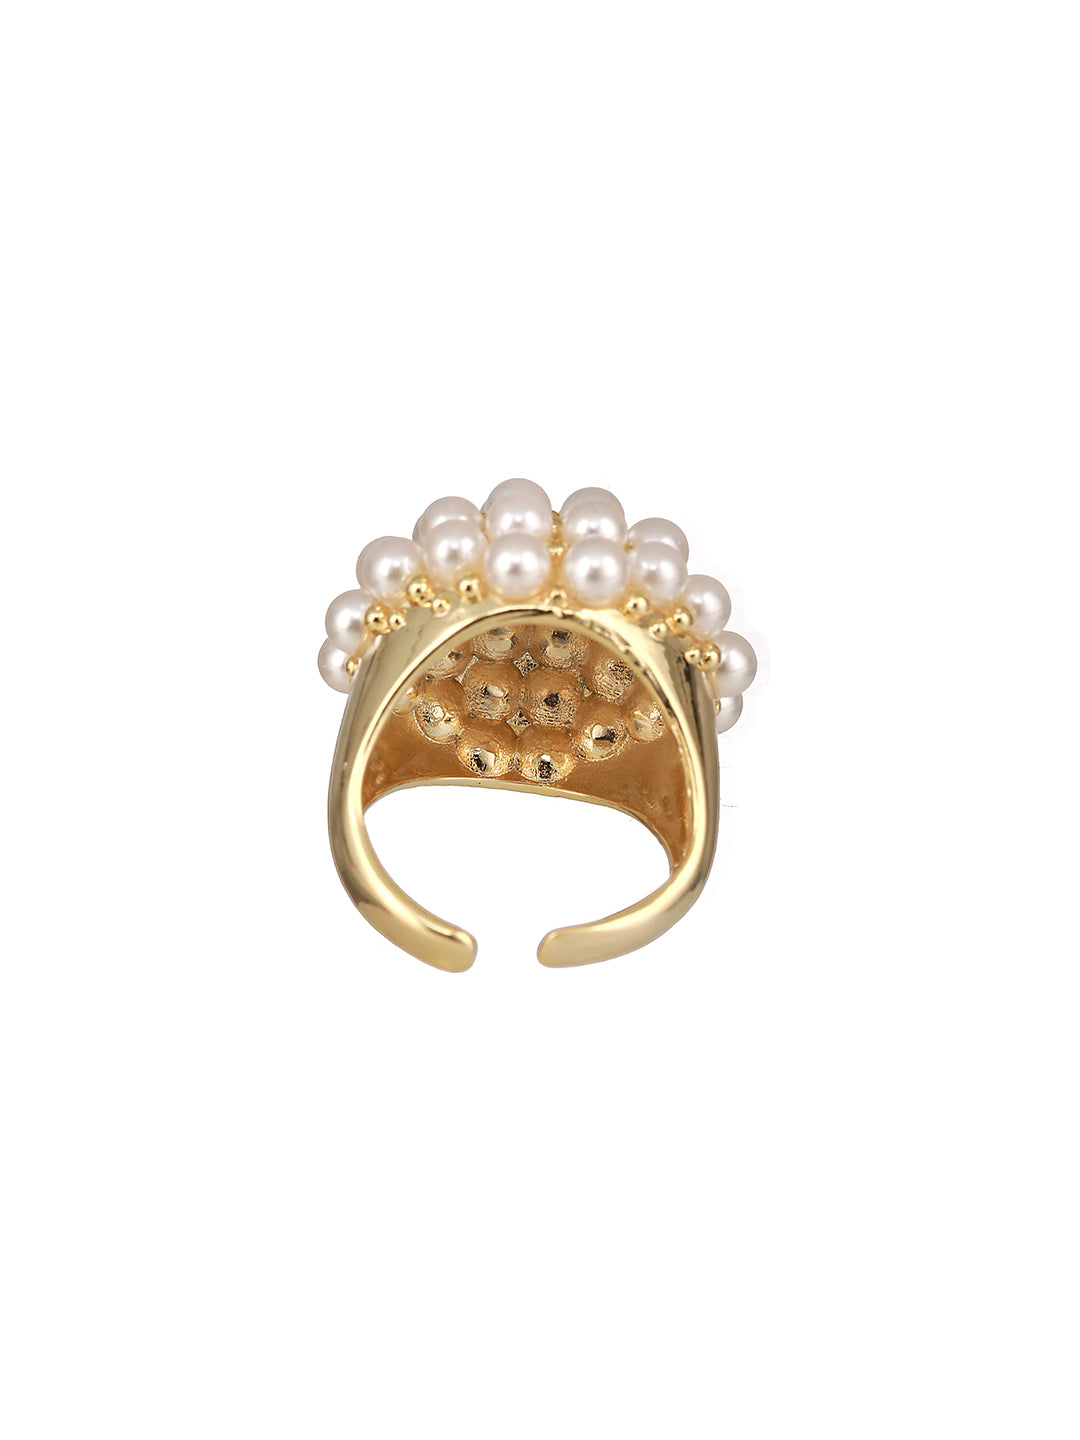 Gold-Plated Artificial Pearls Studded Flower Design Adjustable Finger Ring - Jazzandsizzle